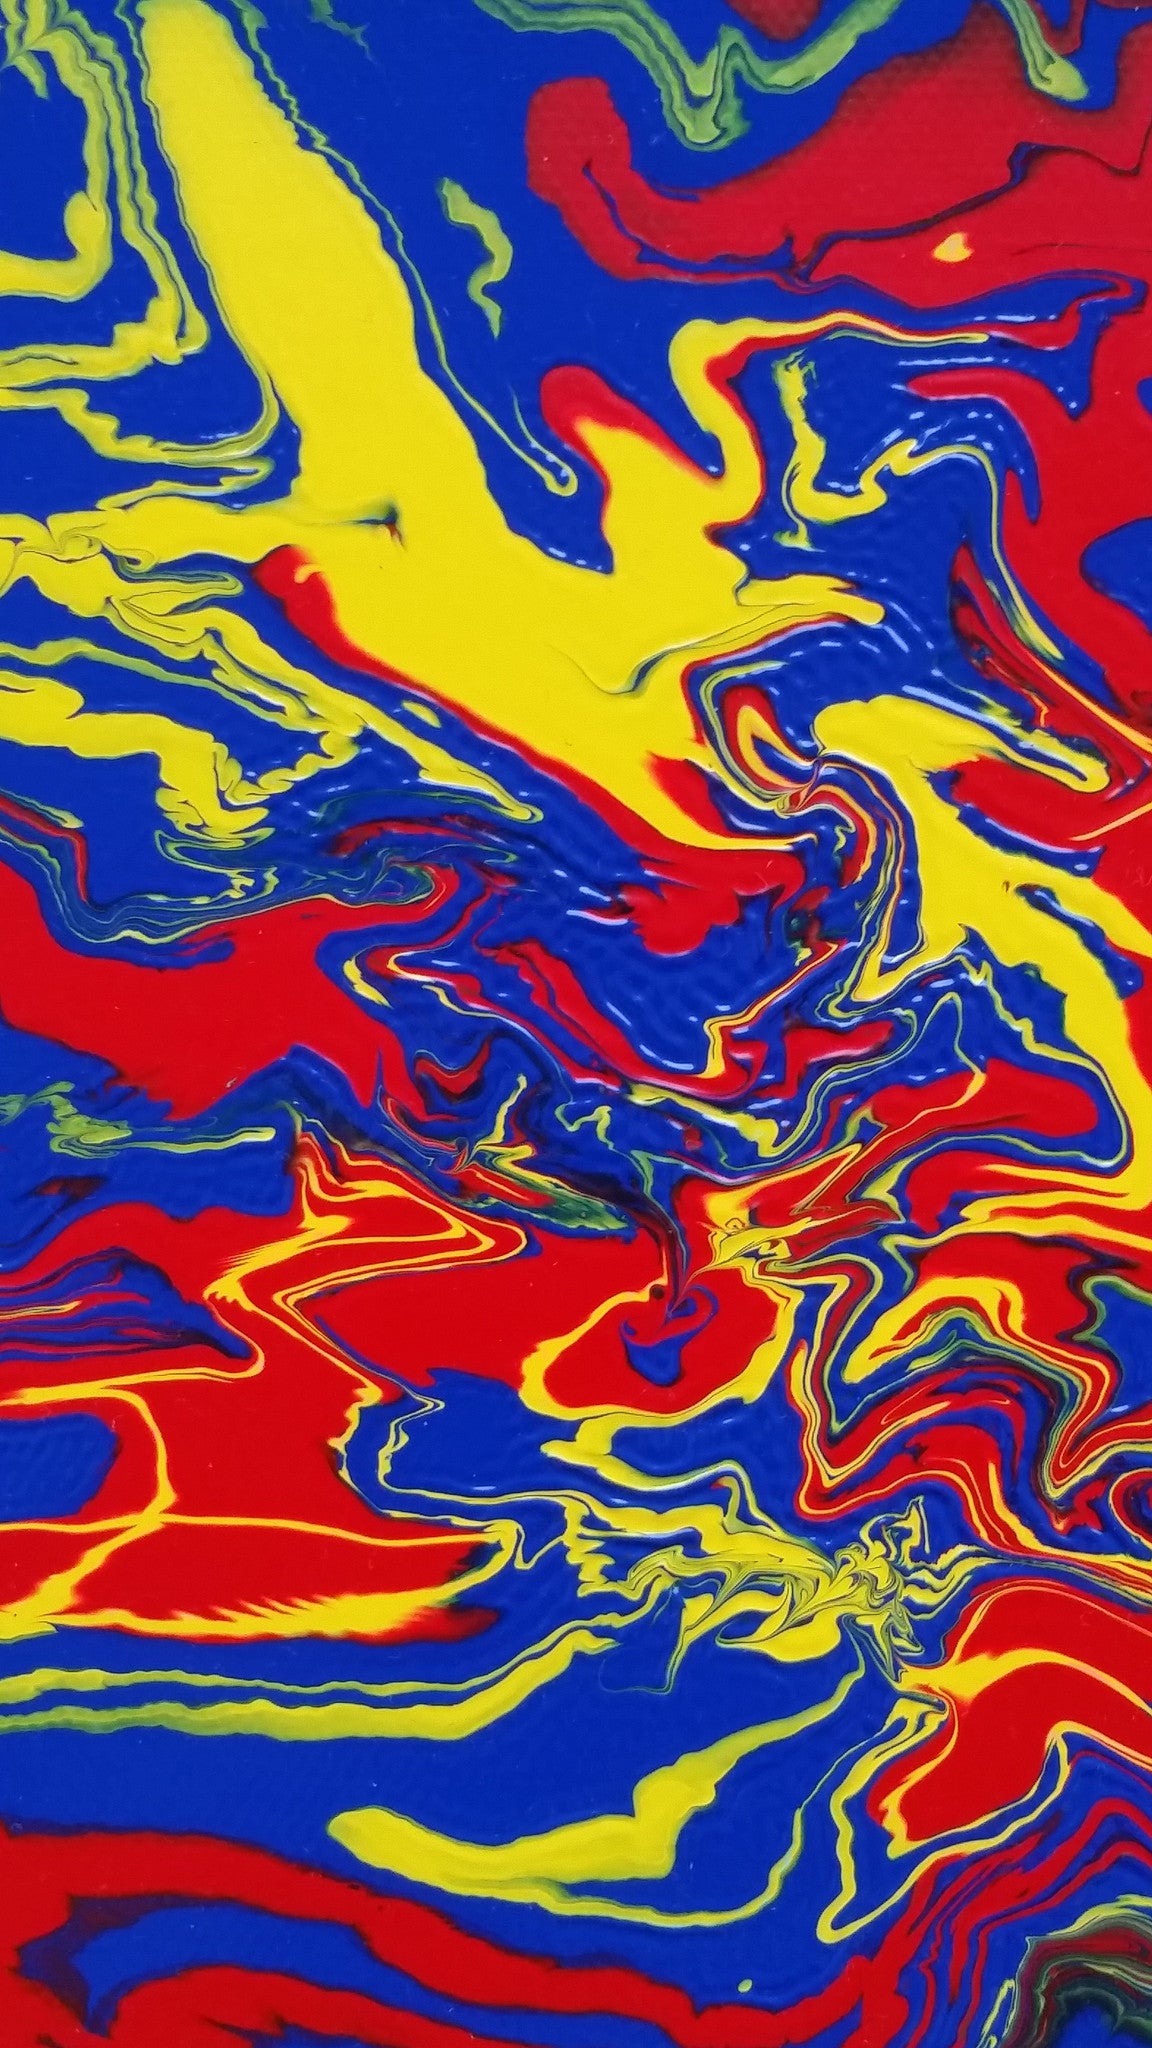 Original Abstract Fluid Painting Modern Art Primary Balance Bold Colors Yellow Blue Red